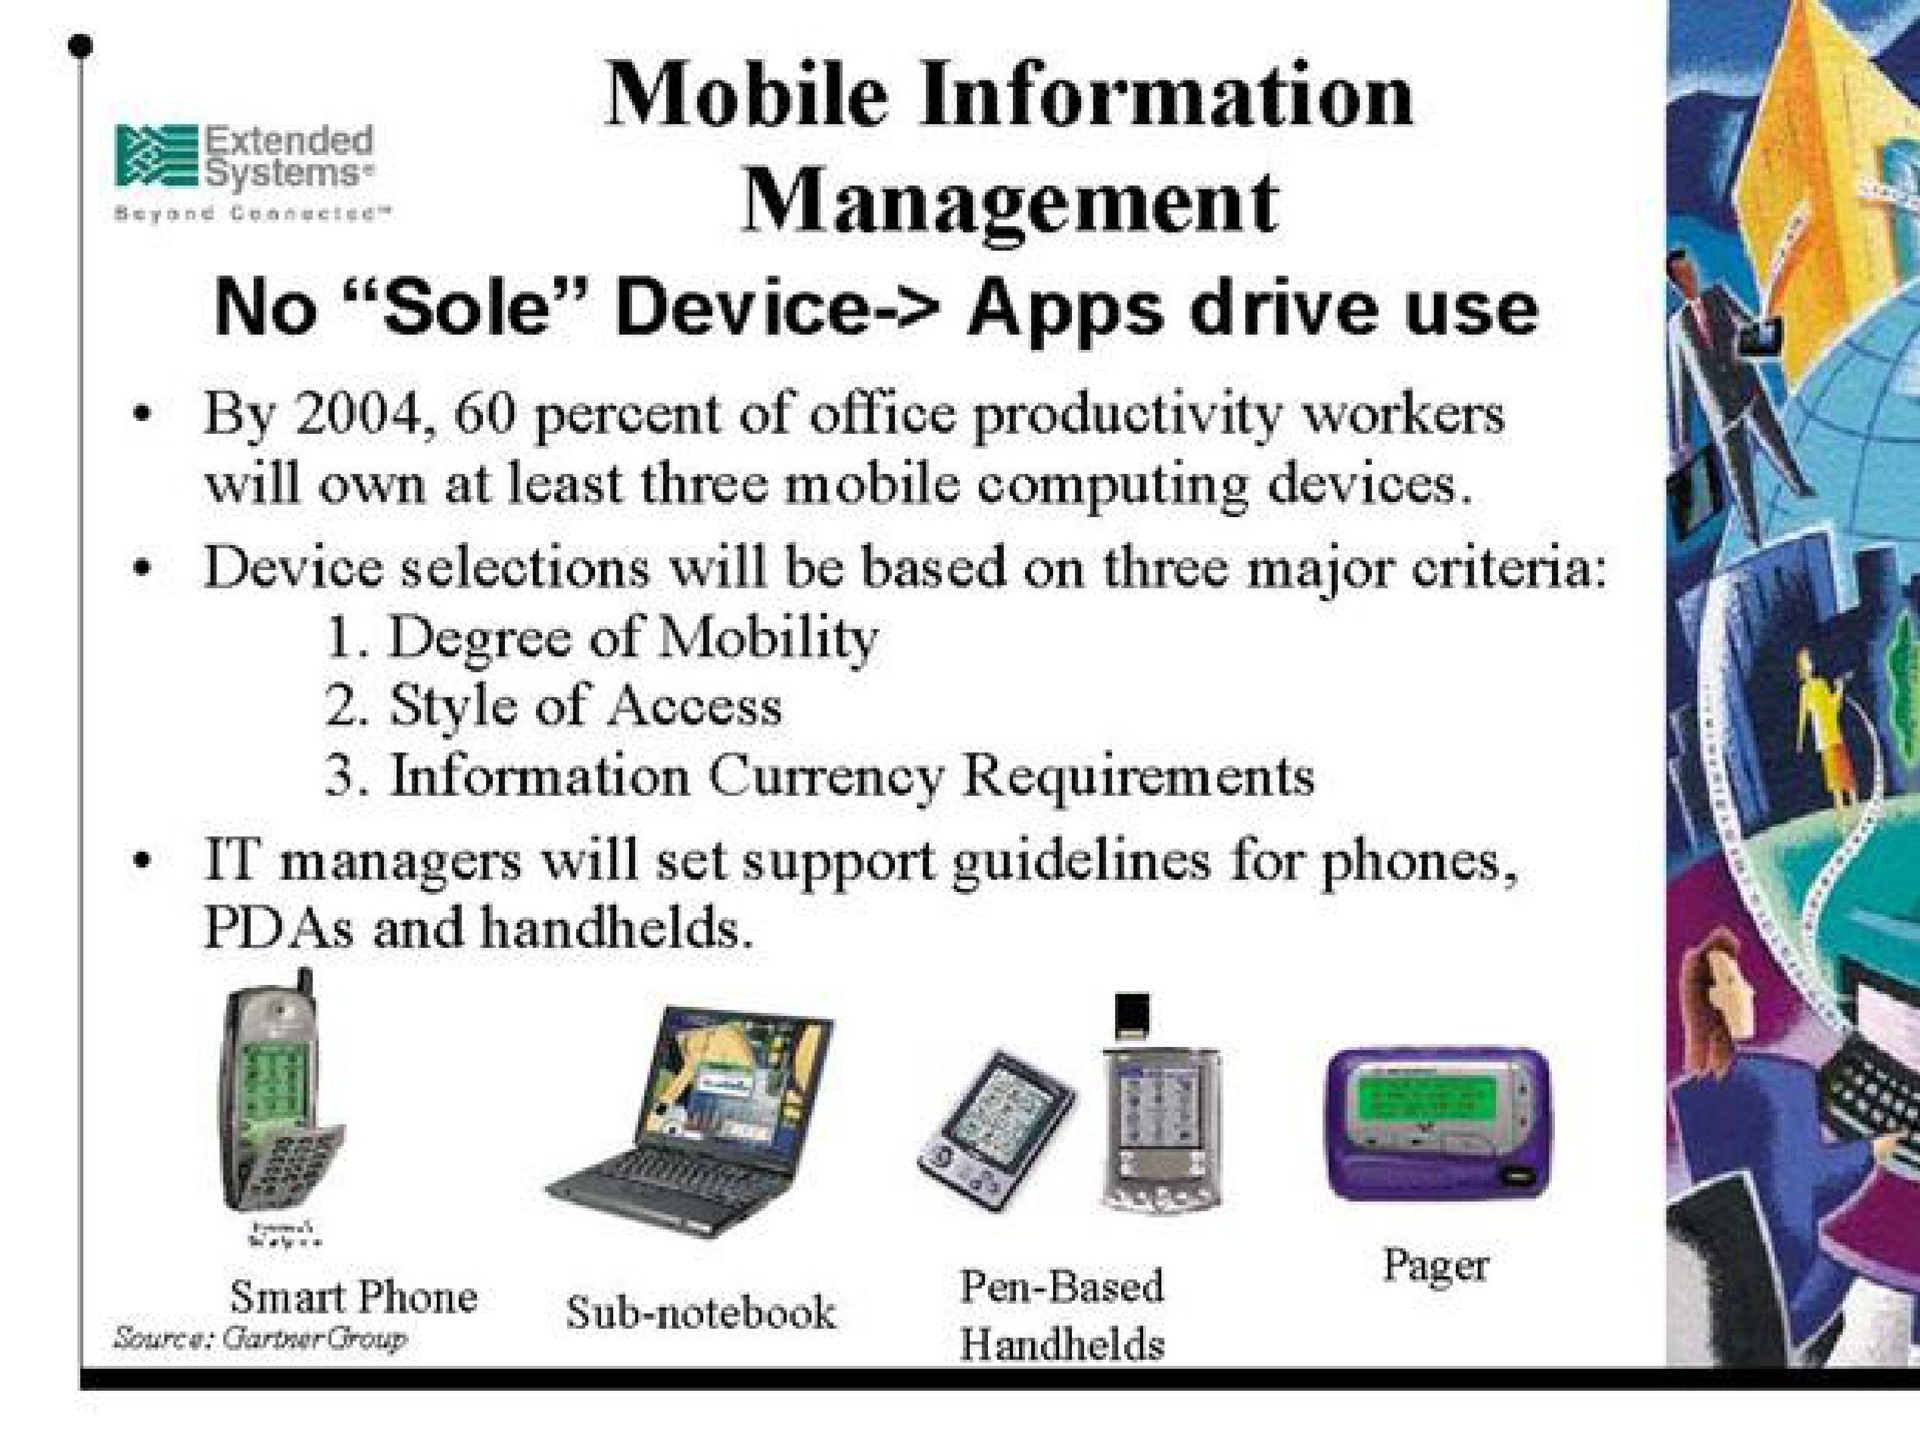 pais mobile information management no sole device drive use | Extended Systems